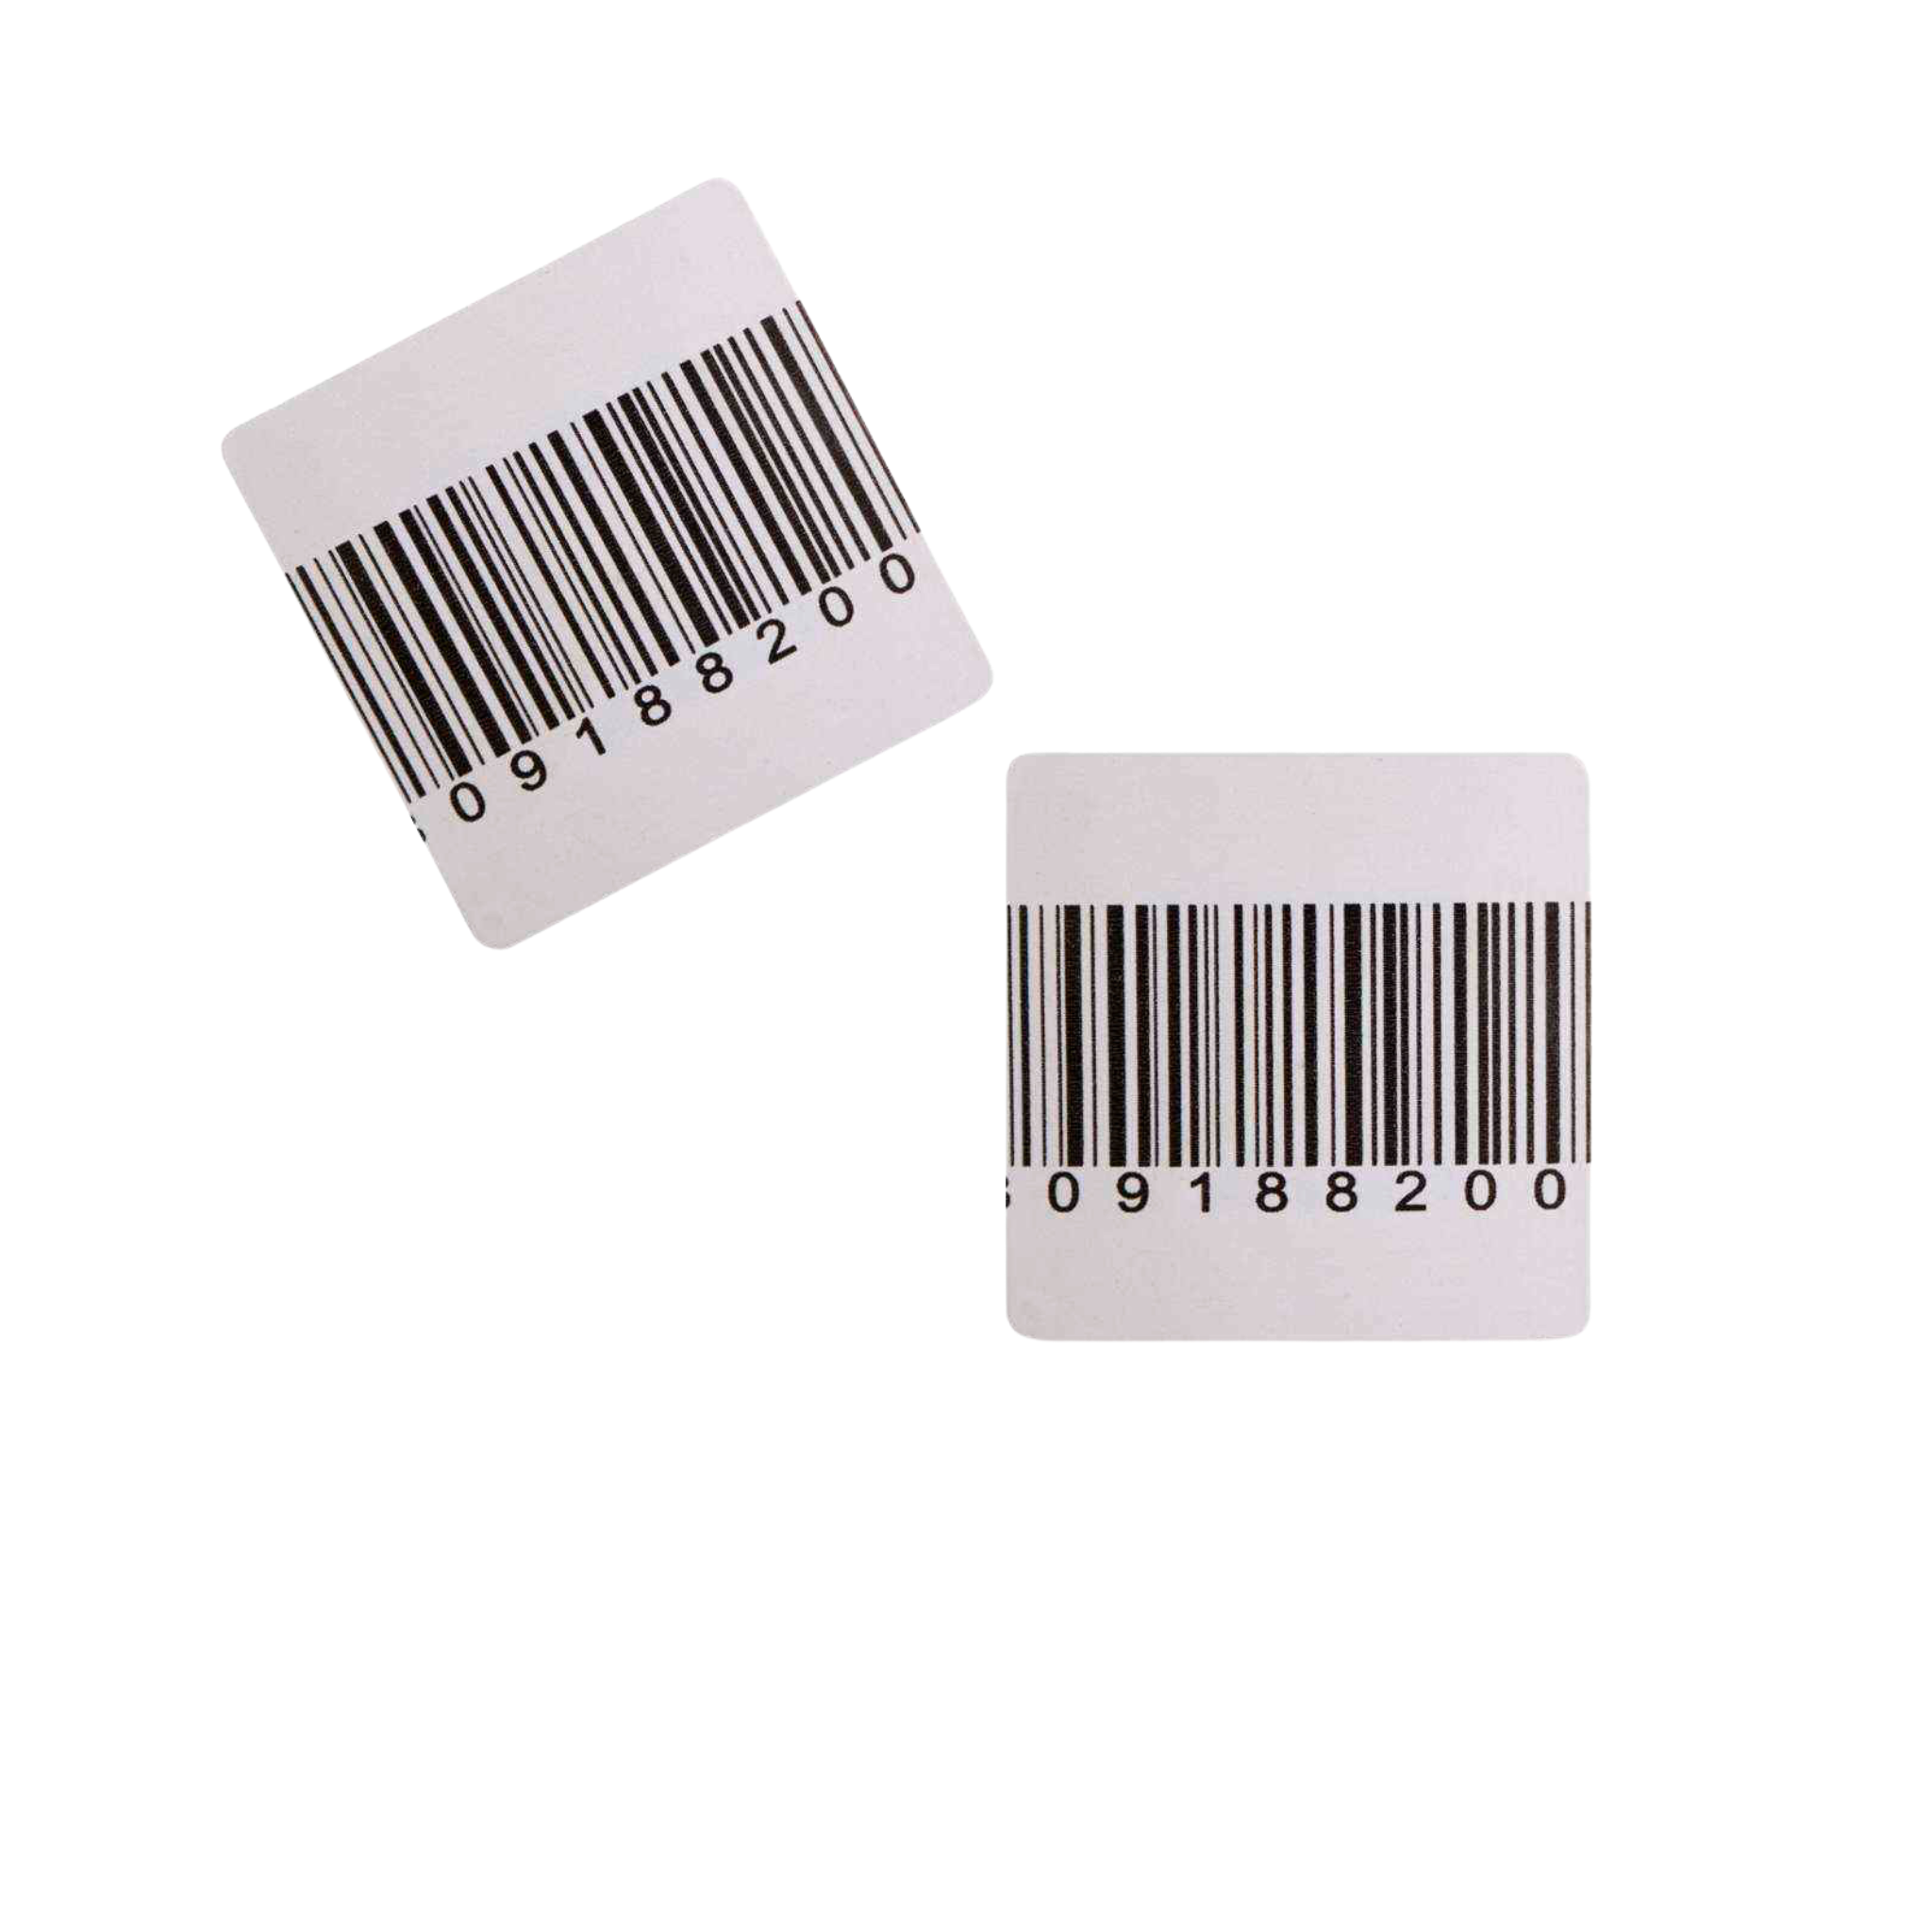 RF Labels 4x4 and 5x5 - Roll of 20,000